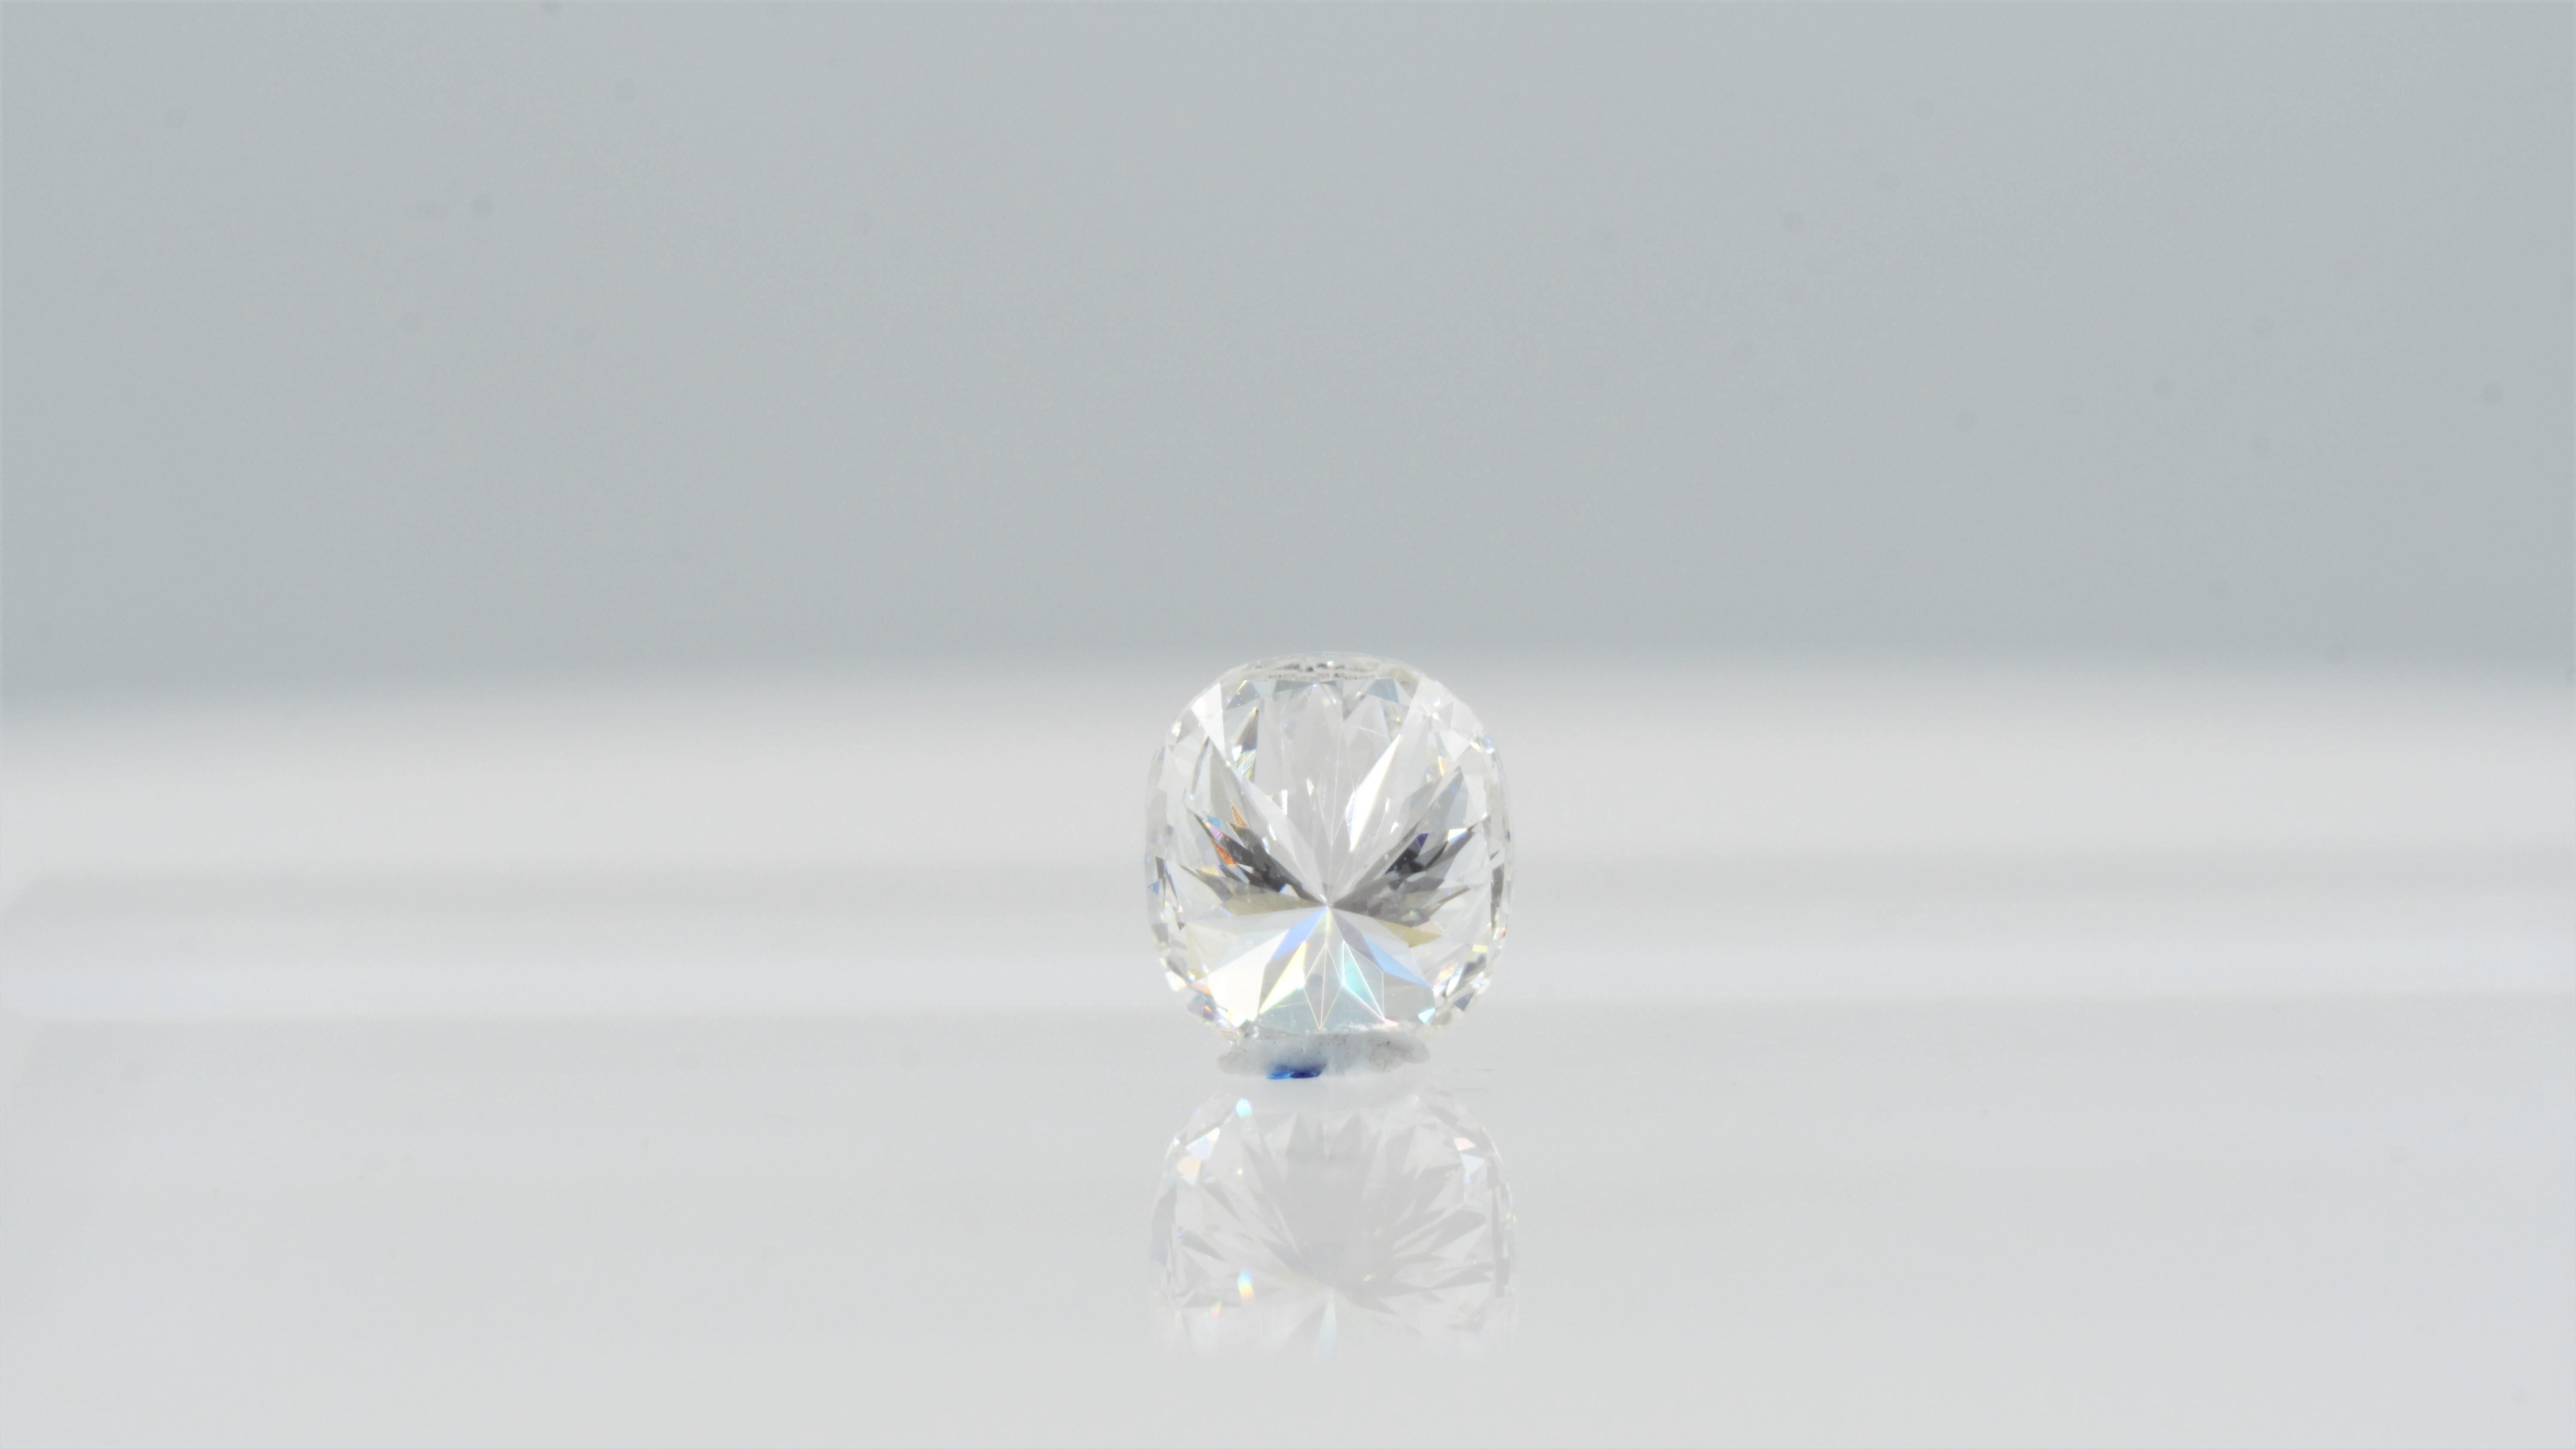 Brilliant 1.00ct loose cushion modified brilliant-cut diamond that's been GIA certified. The color is H with a faint fluorescence which brightens and whitens the diamond. The diamond has nice brilliance and it's VS2 in clarity, so there are no